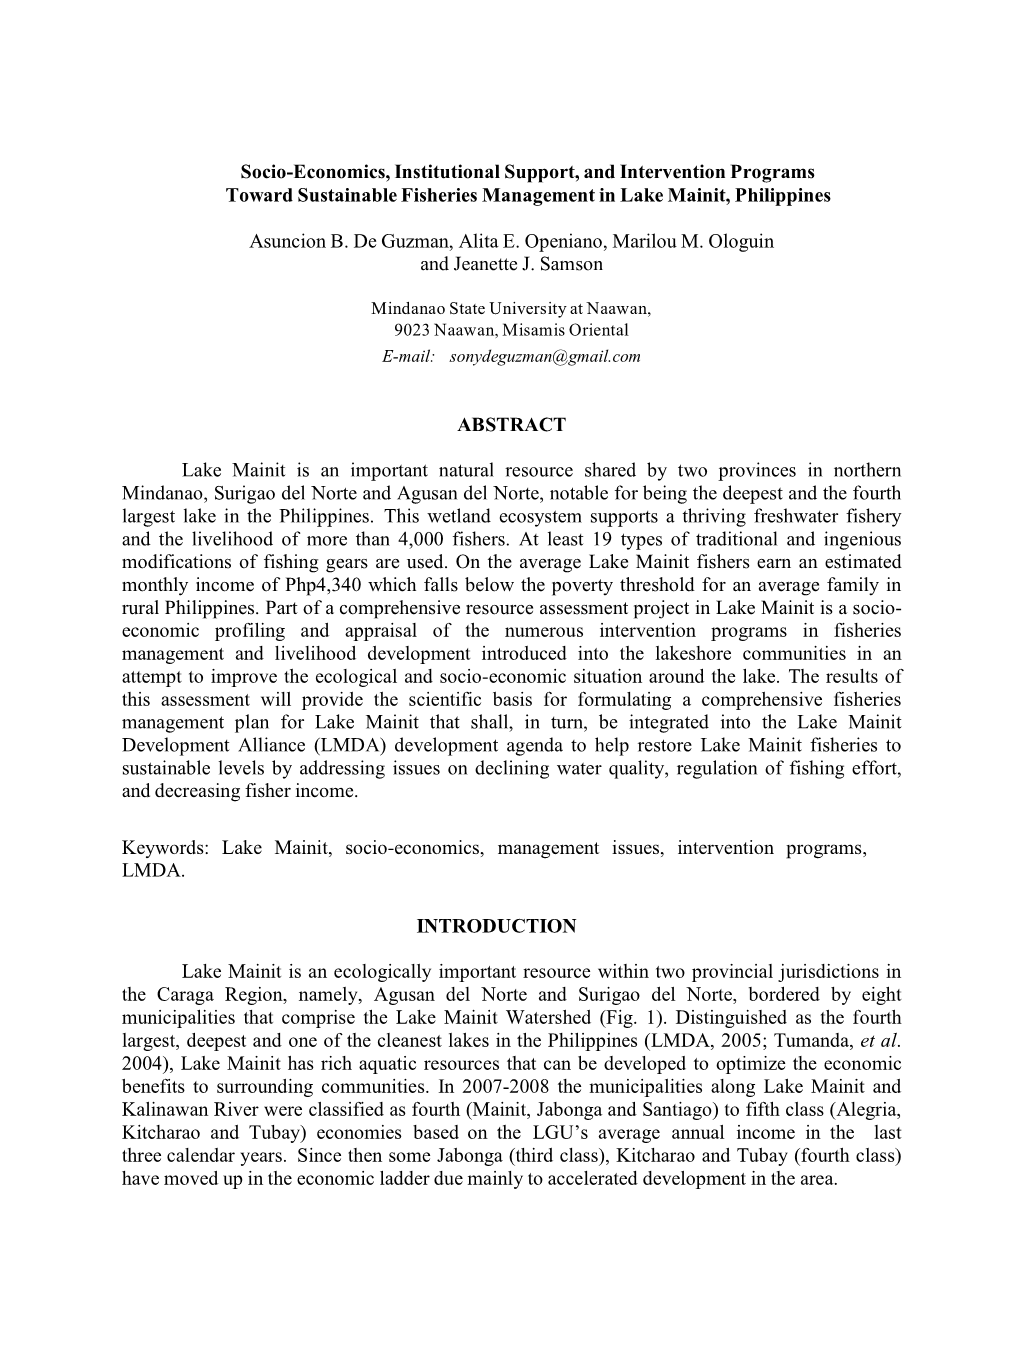 Socio-Economics, Institutional Support, and Intervention Programs Toward Sustainable Fisheries Management in Lake Mainit, Philippines